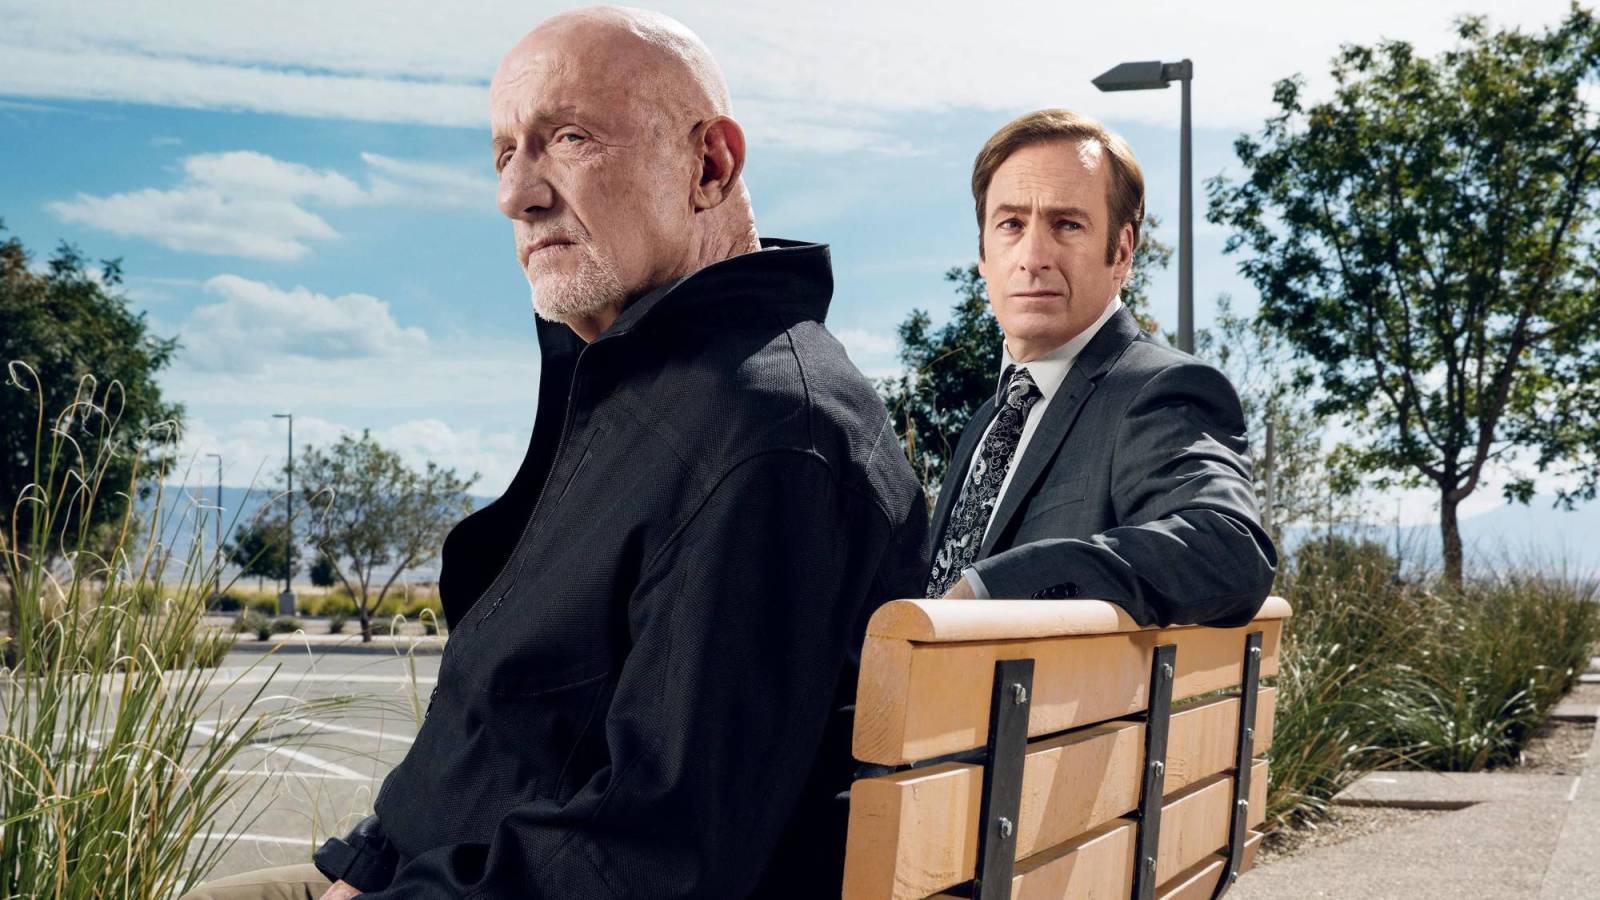 The 25 best episodes of 'Better Call Saul', ranked | Yardbarker